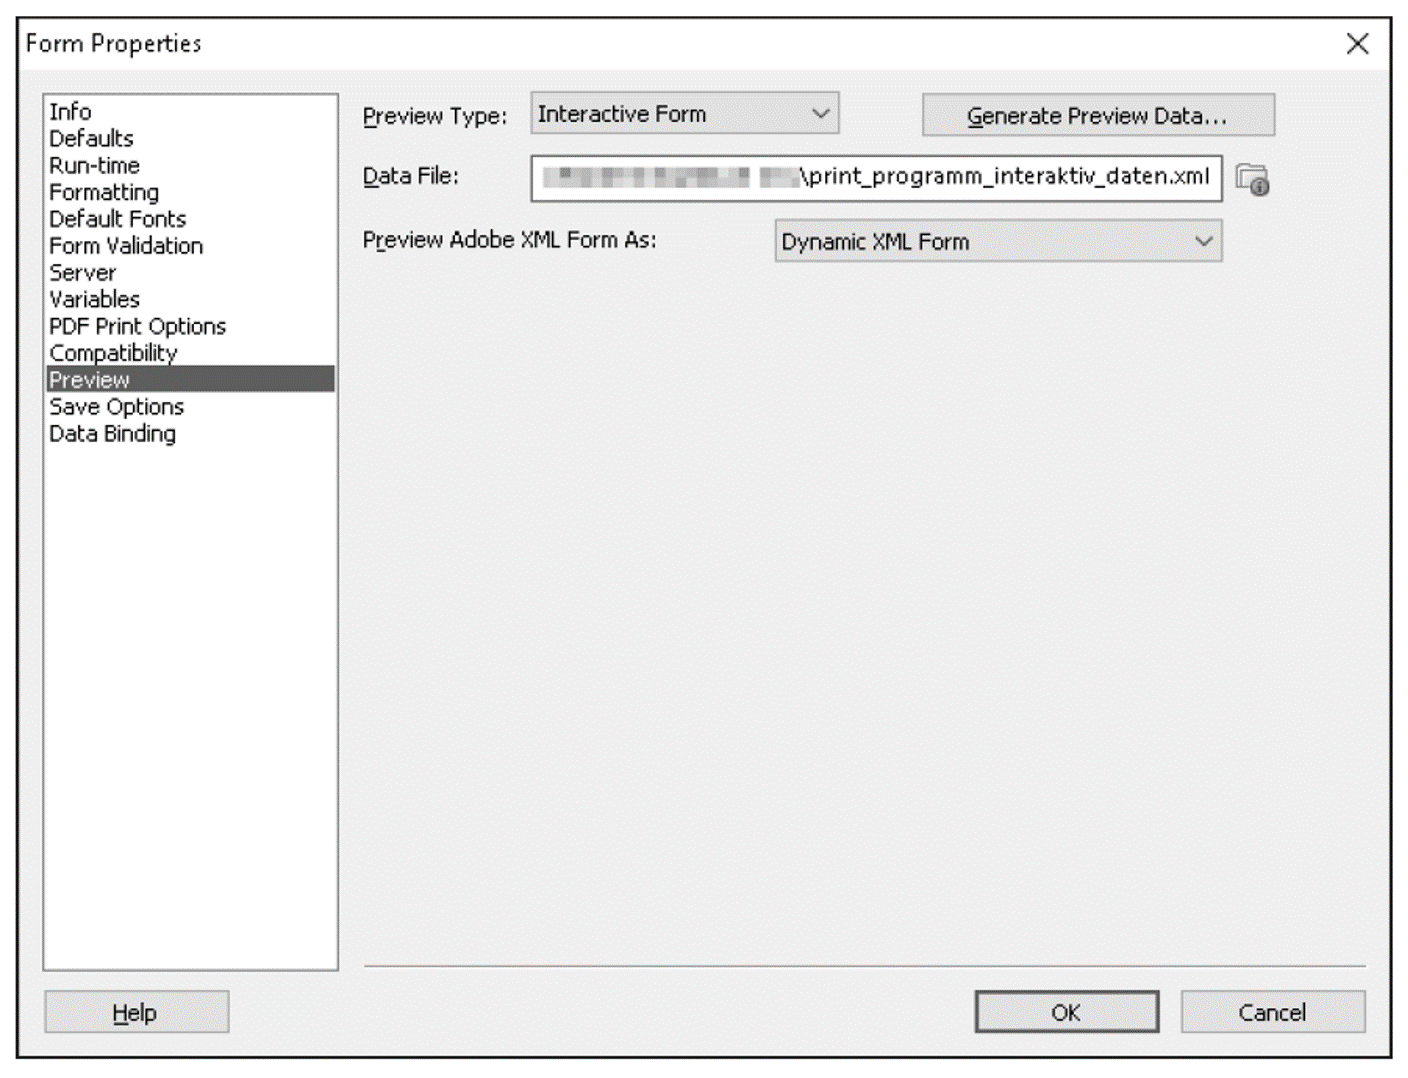 Preview Page of the Form Properties Dialog